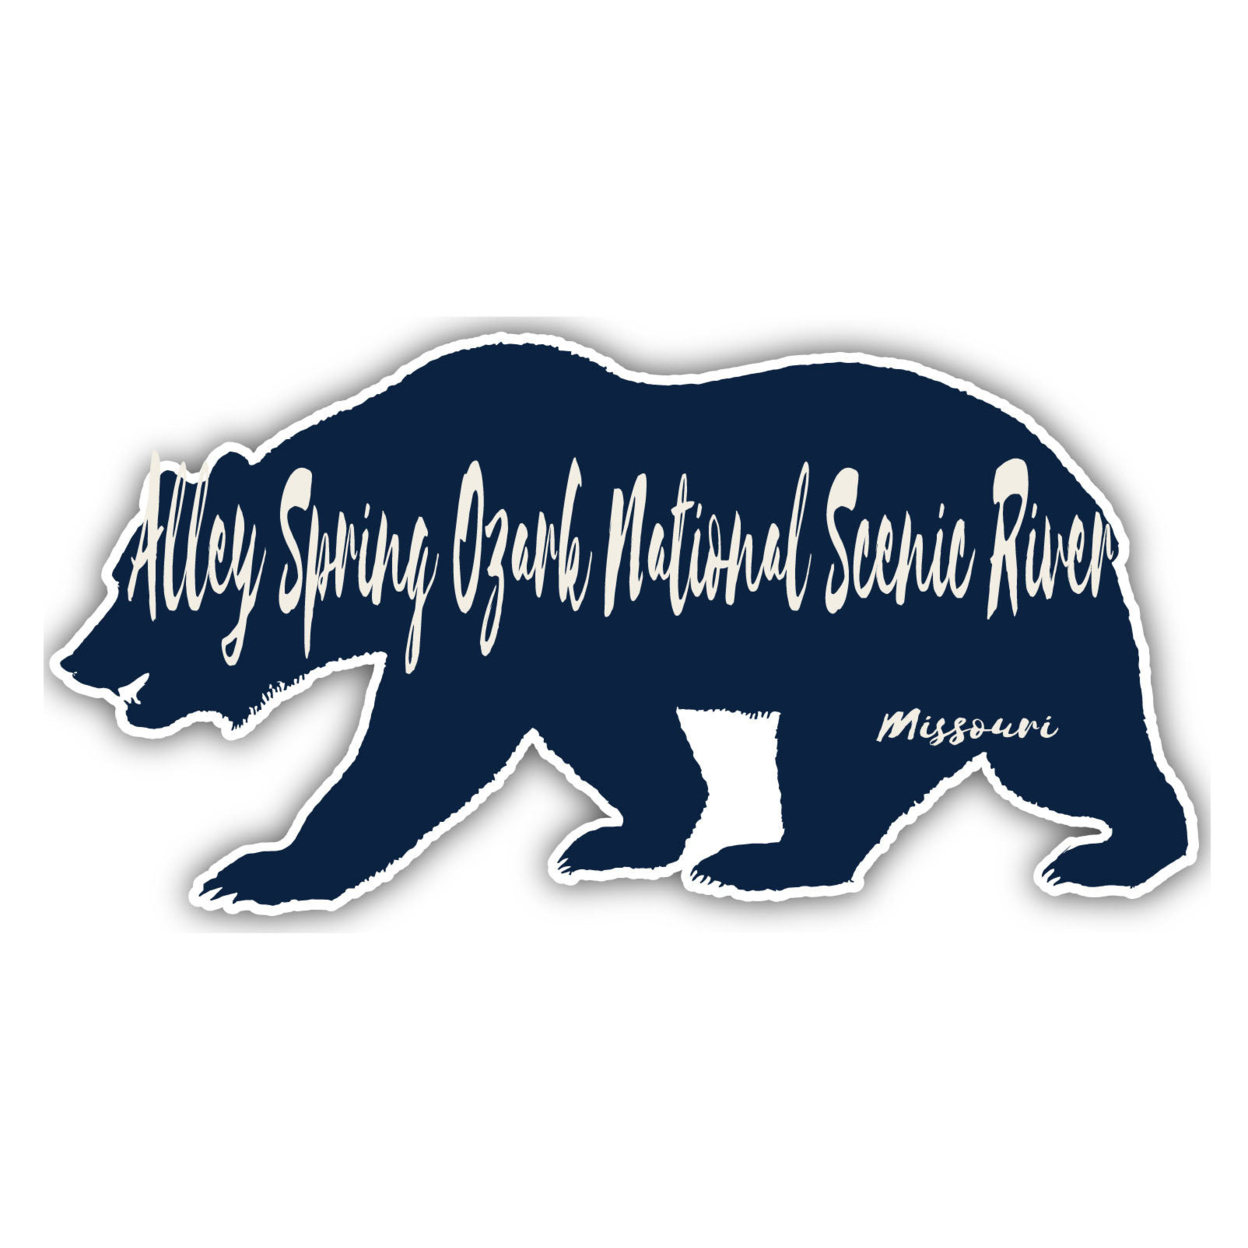 Alley Spring Ozark National Scenic River Missouri Souvenir Decorative Stickers (Choose Theme And Size) - 4-Pack, 2-Inch, Bear